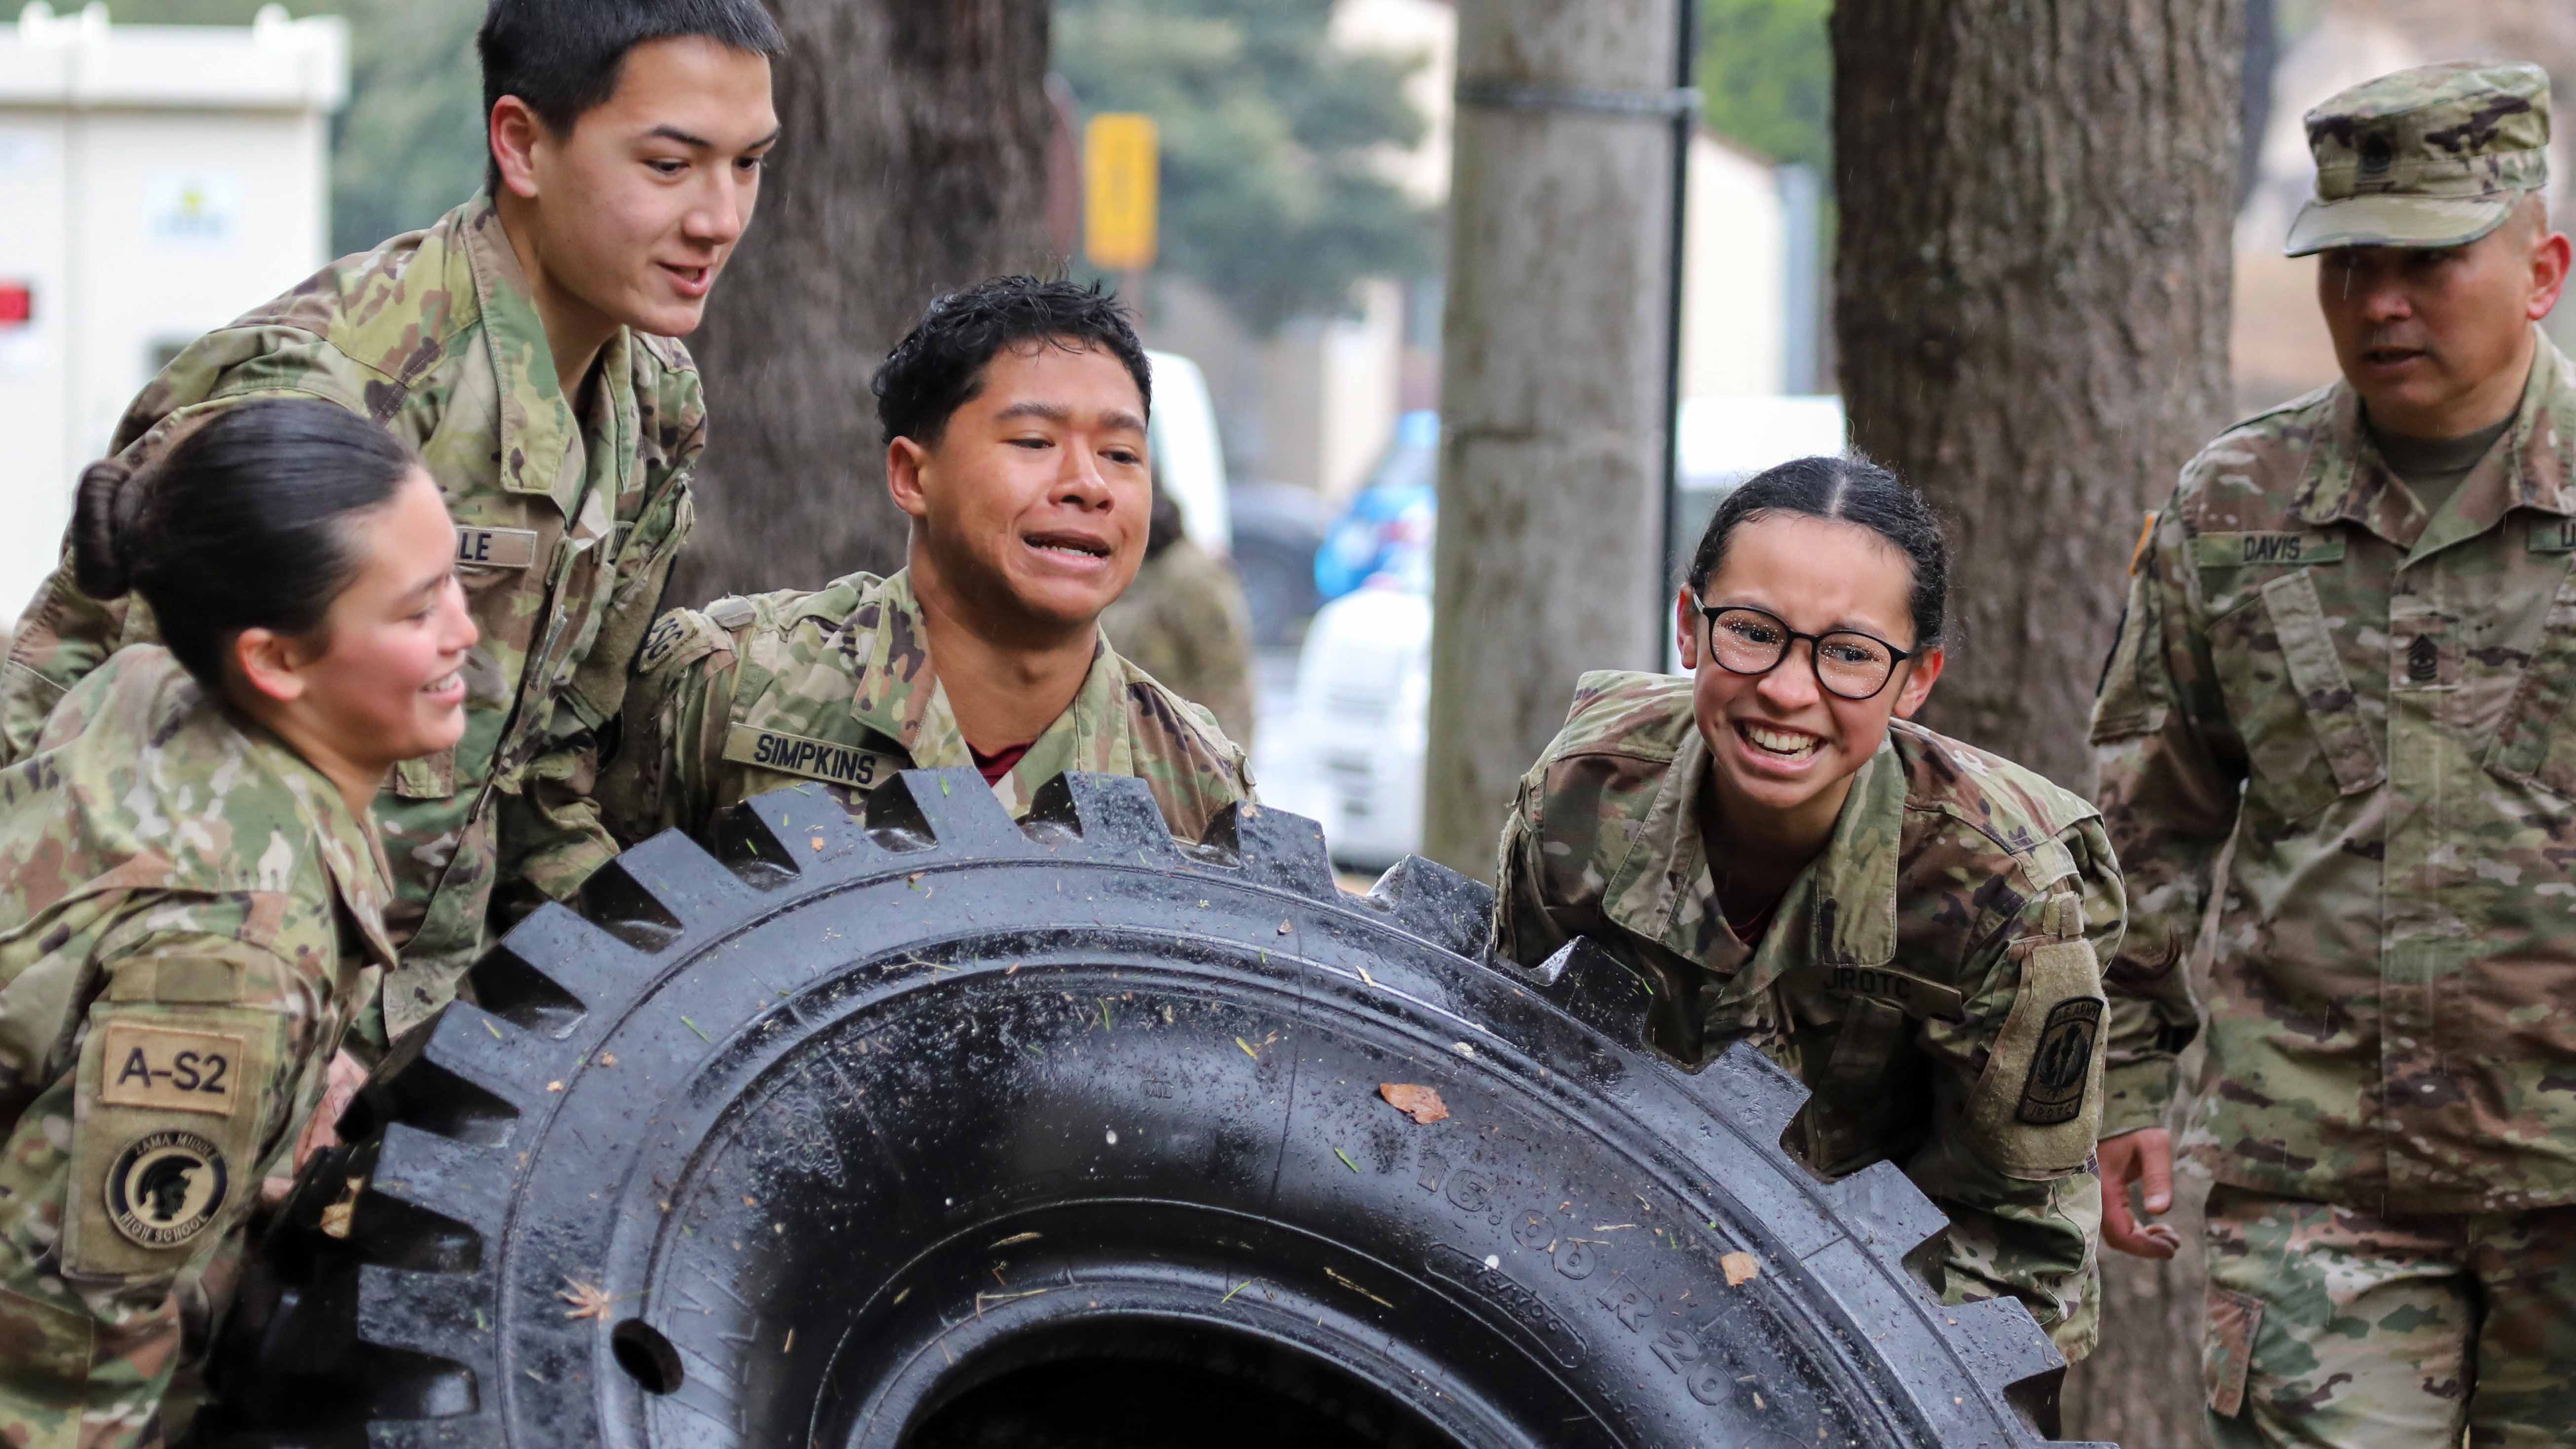 JROTC Cadets team up to flip over a tire as part of an obstacle course at Camp Zama